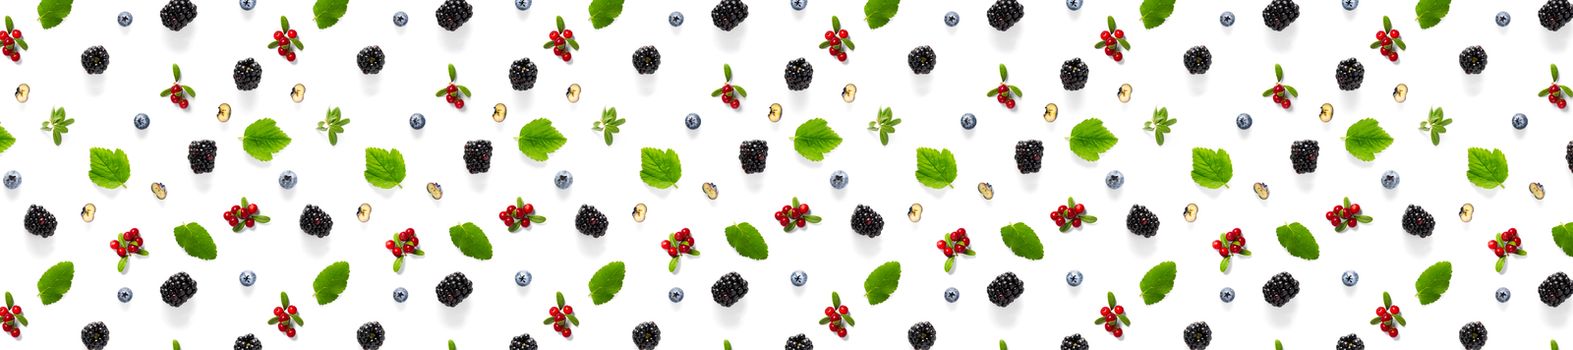 Creative set of wild berries, blackberry, blueberry, lingonberry and bramble. modern banner background on white backdrop made from autumn forest wild berries. Forest berries mix